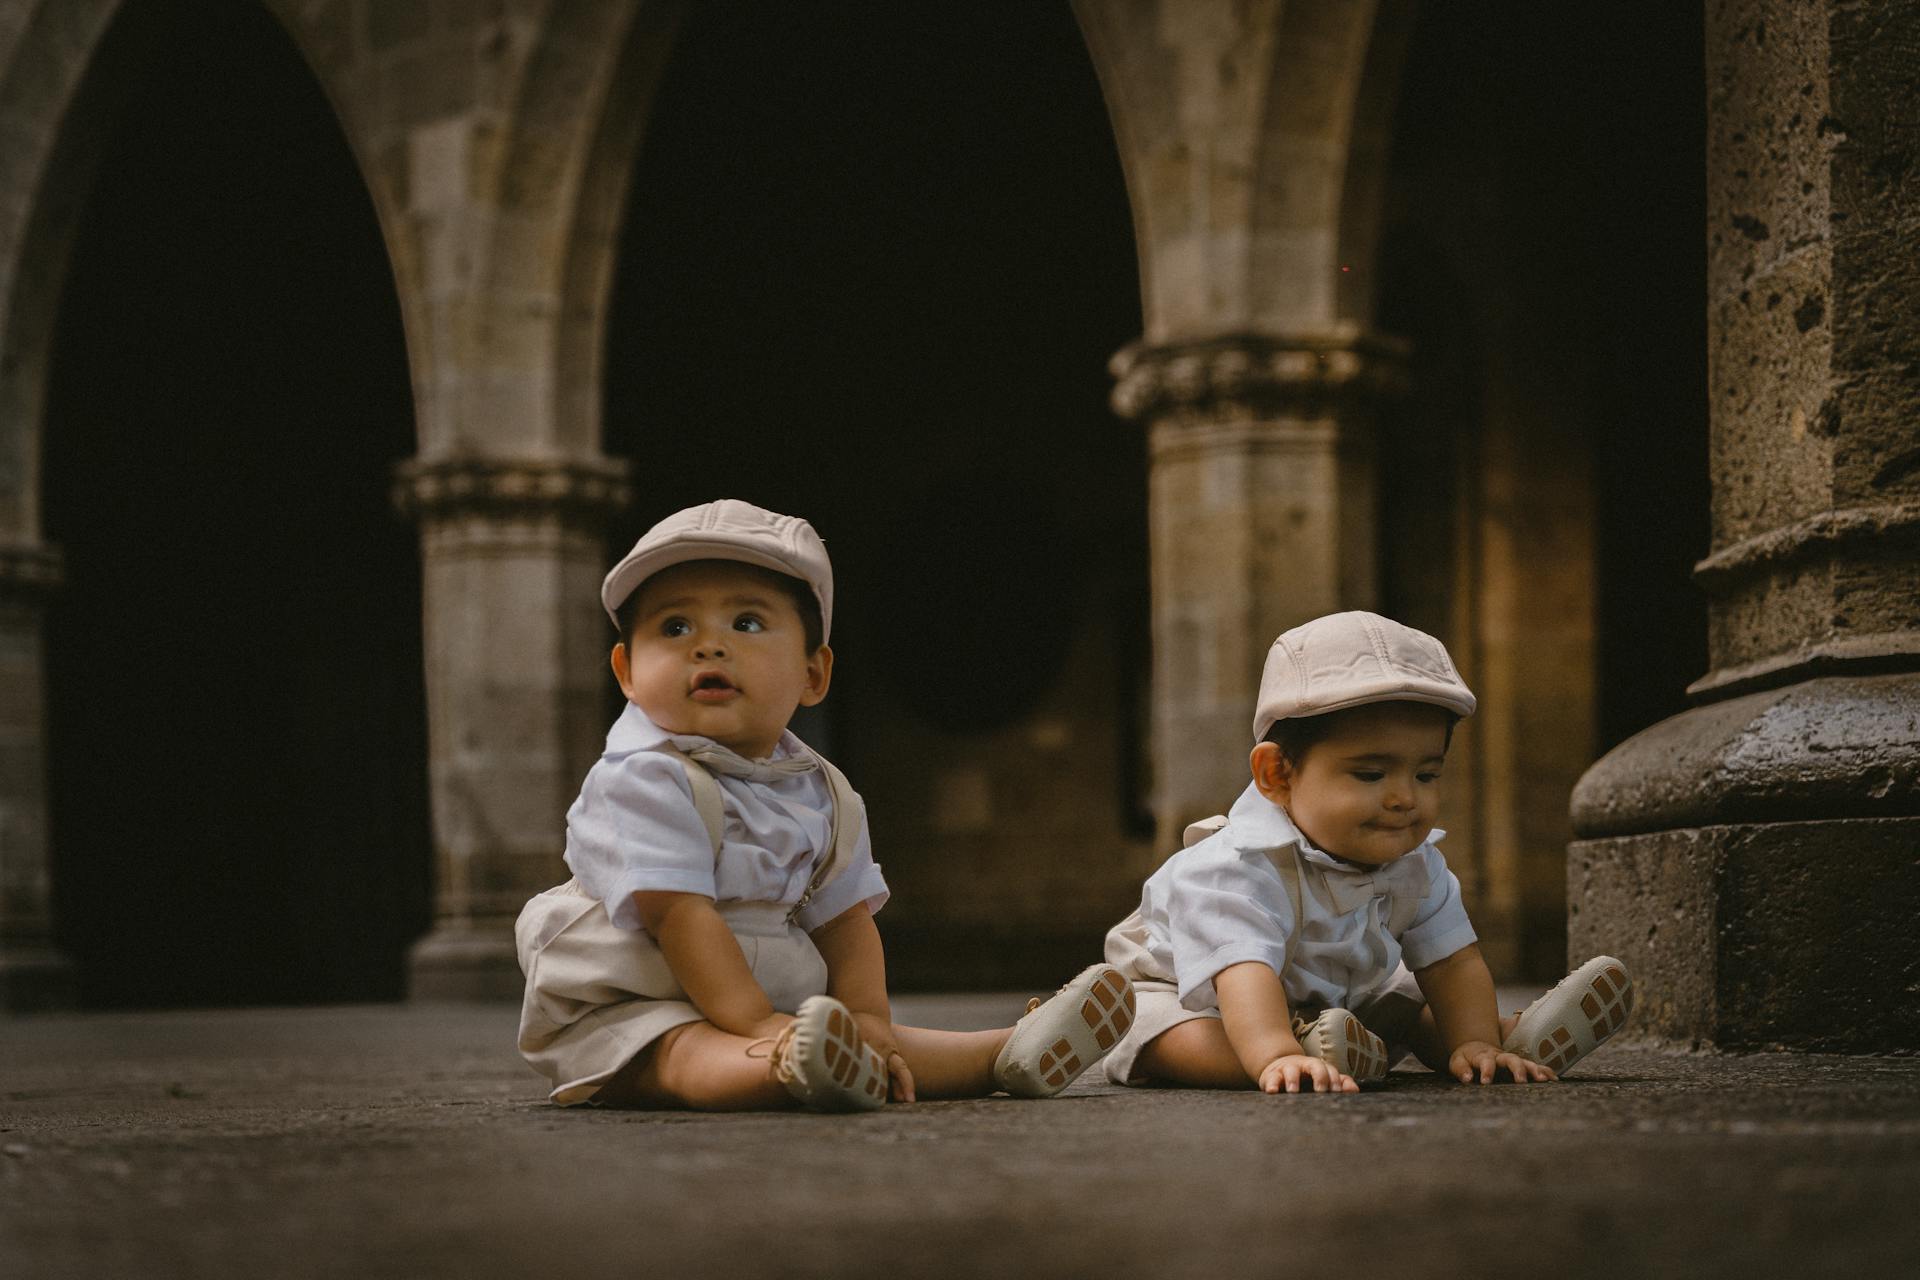 Twin boys sitting together | Source: Pexels